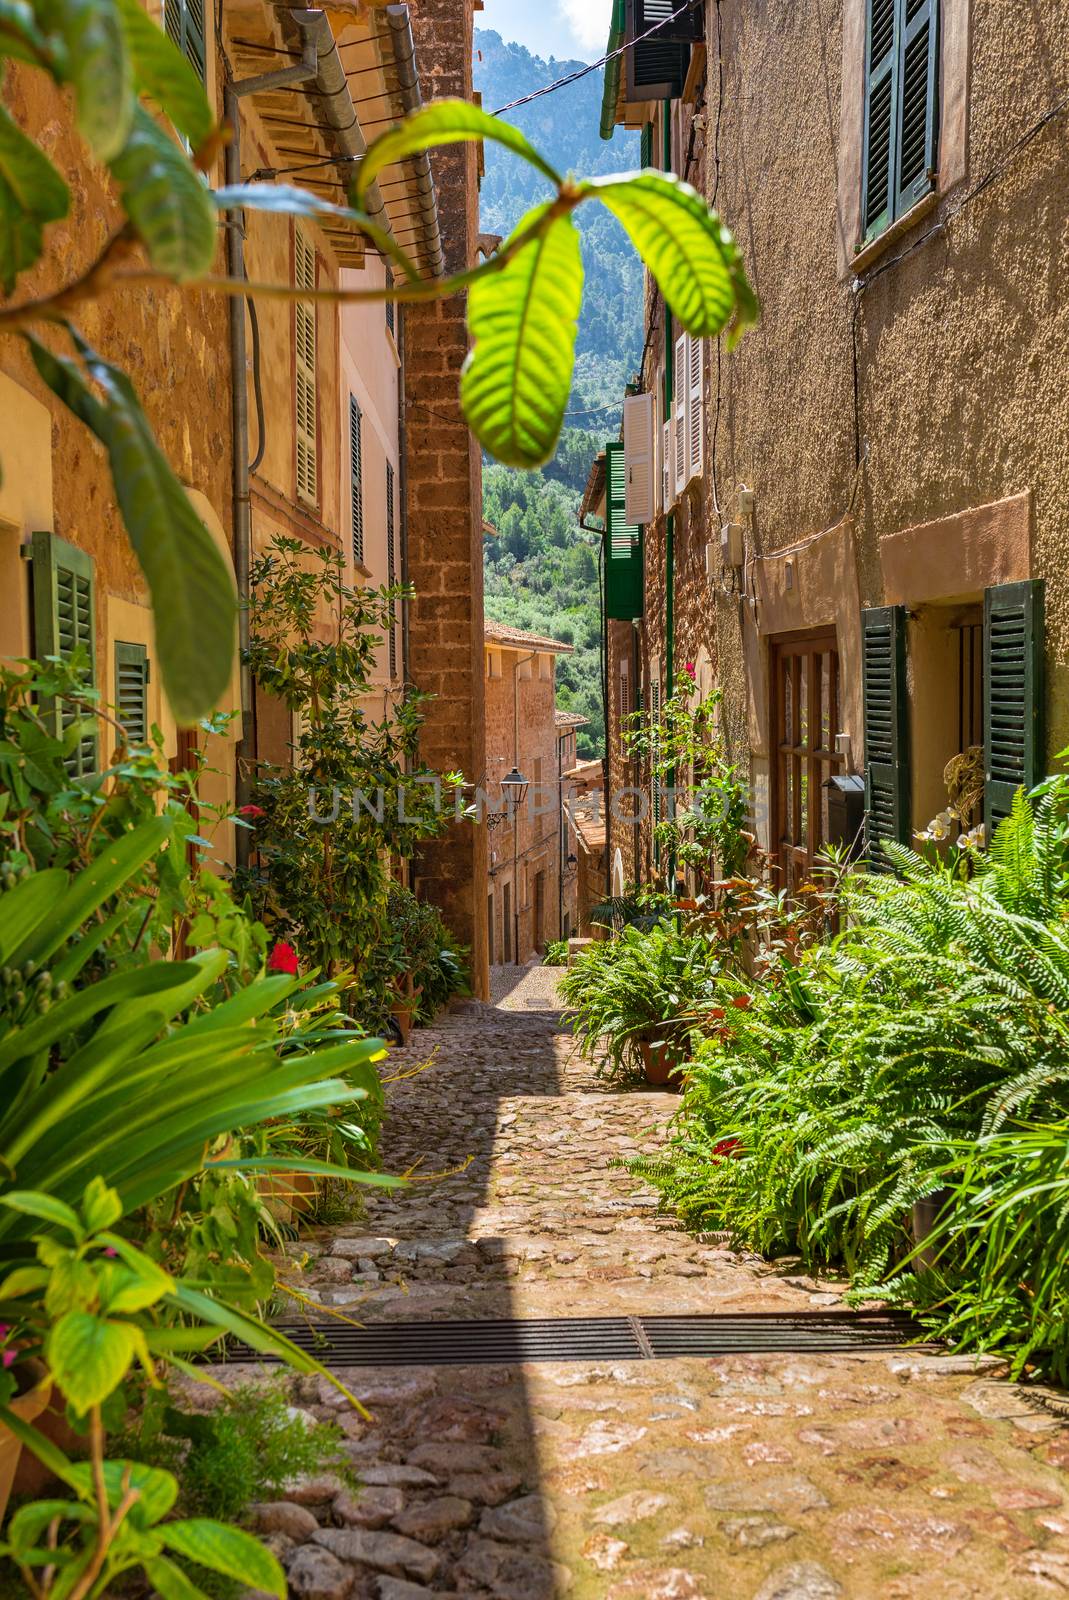 Idyllic narrow alley with potted flower plants at mediterranean village Fornalutx, Majorca Spain by Vulcano